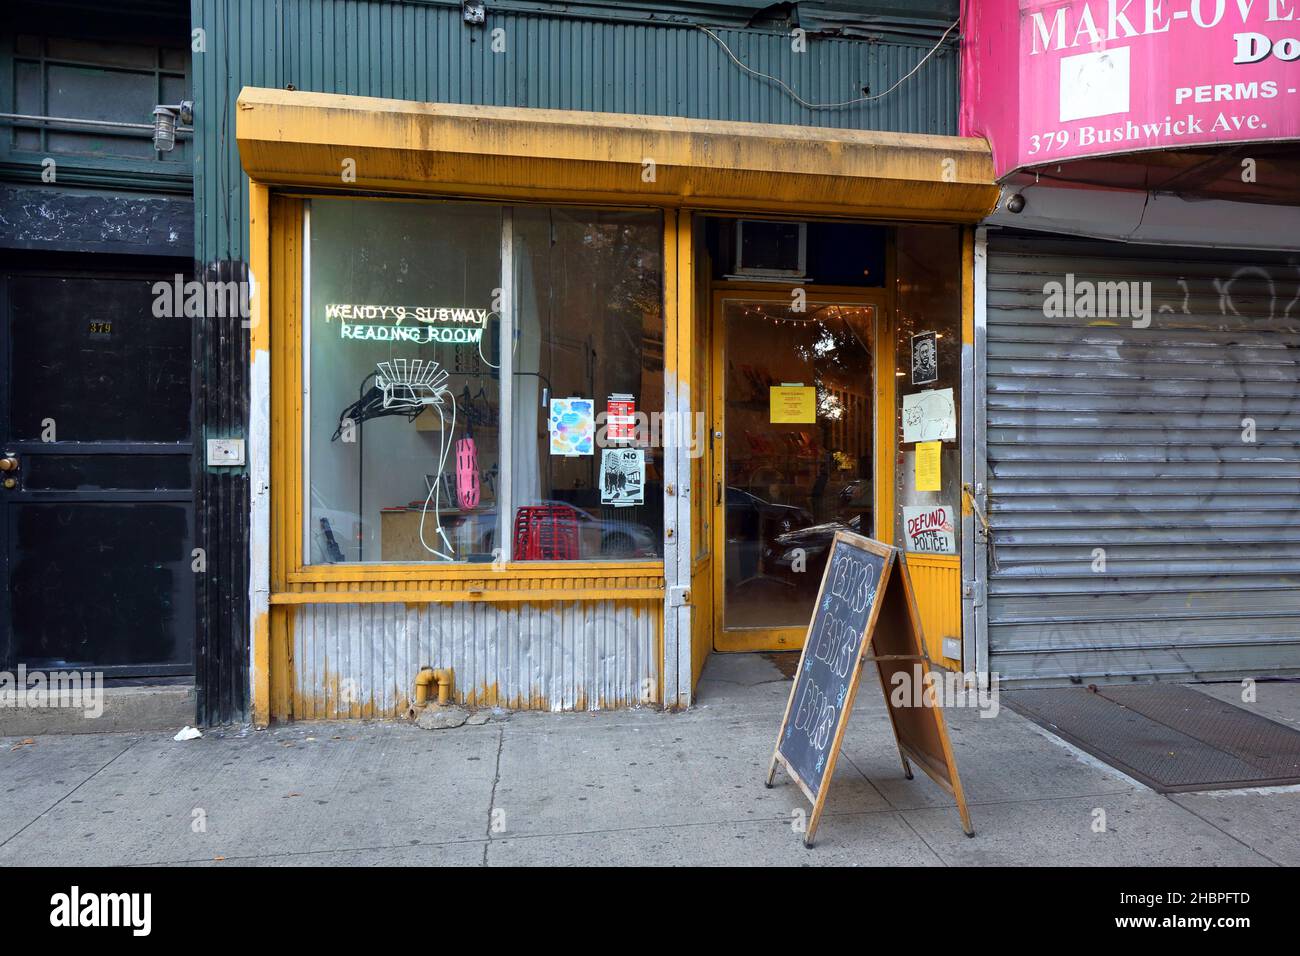 Wendy’s Subway, 379 Bushwick Ave, Brooklyn, NY. exterior storefront of an artist book library and writing space in the Bushwick neighborhood. Stock Photo